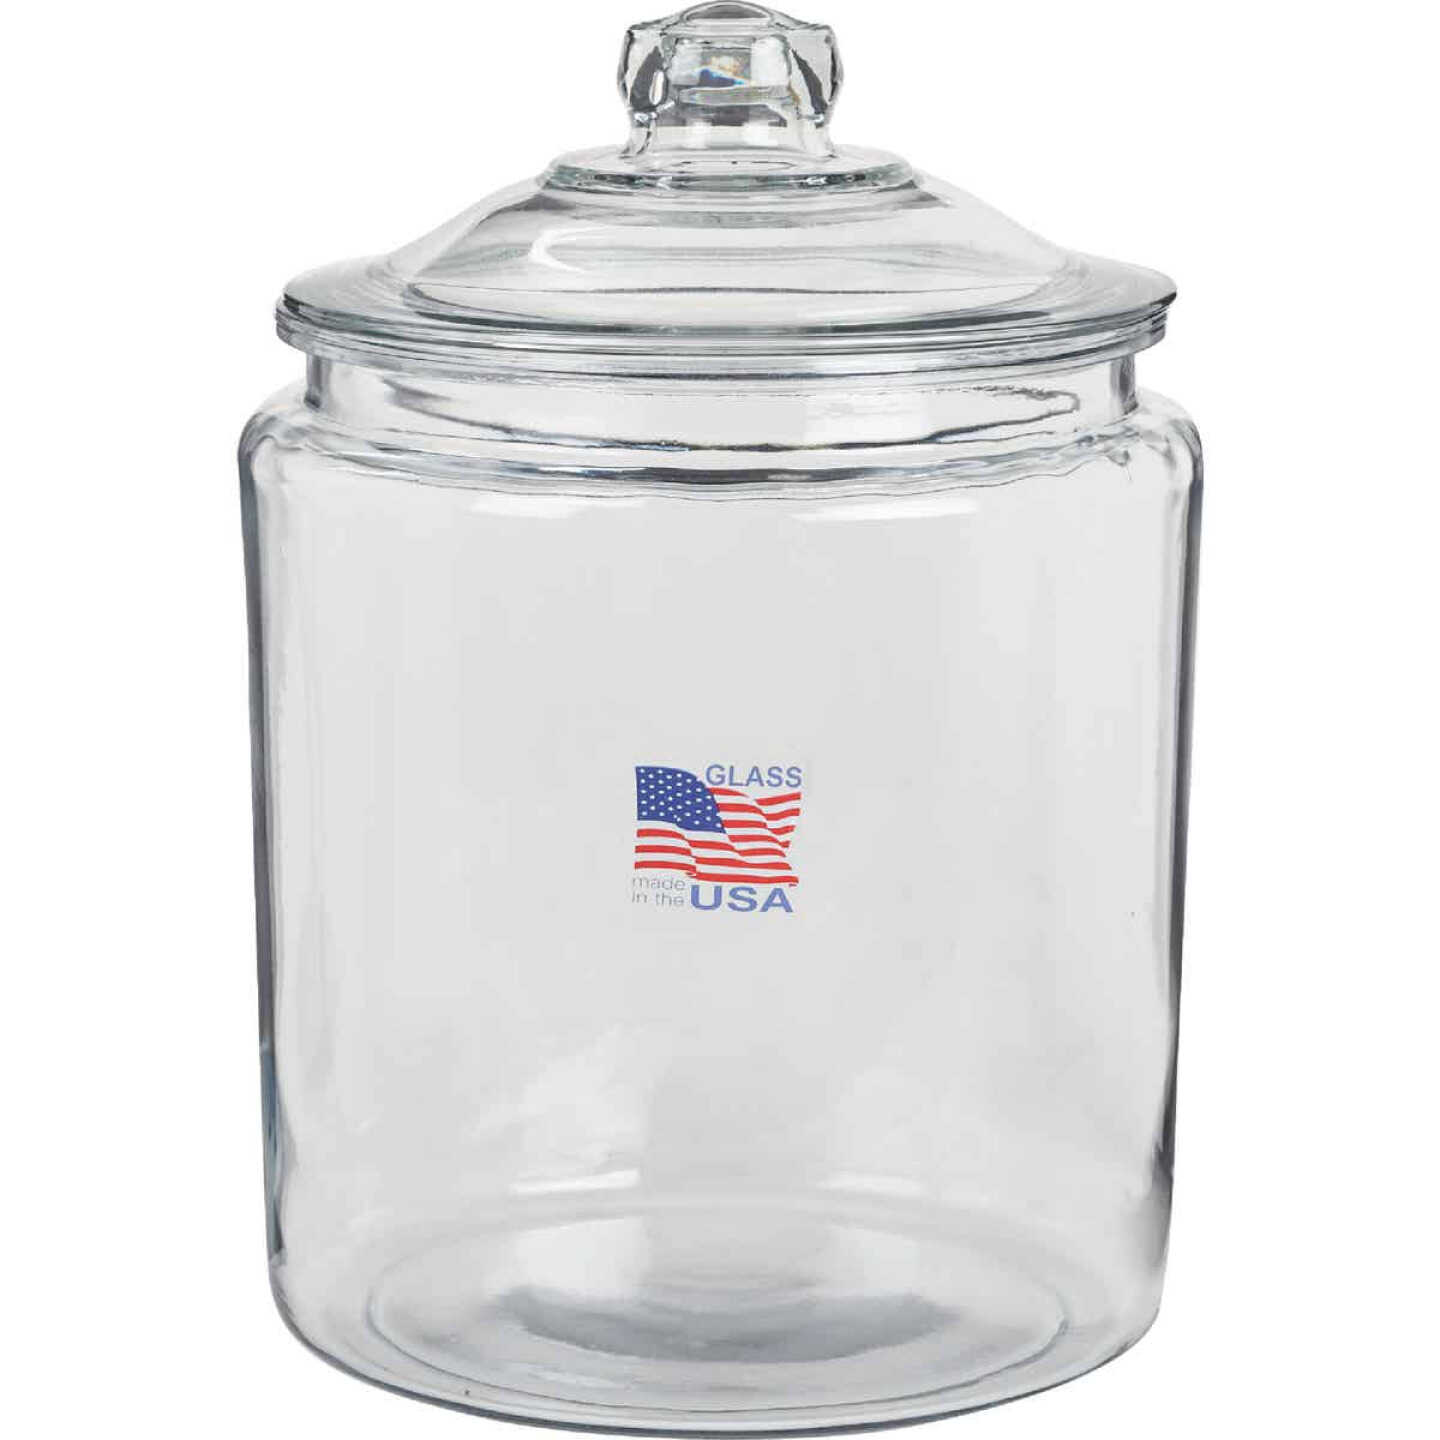 Anchor Hocking Glass Cookie / Candy Jar (1/2 Gallon w/ Lid)